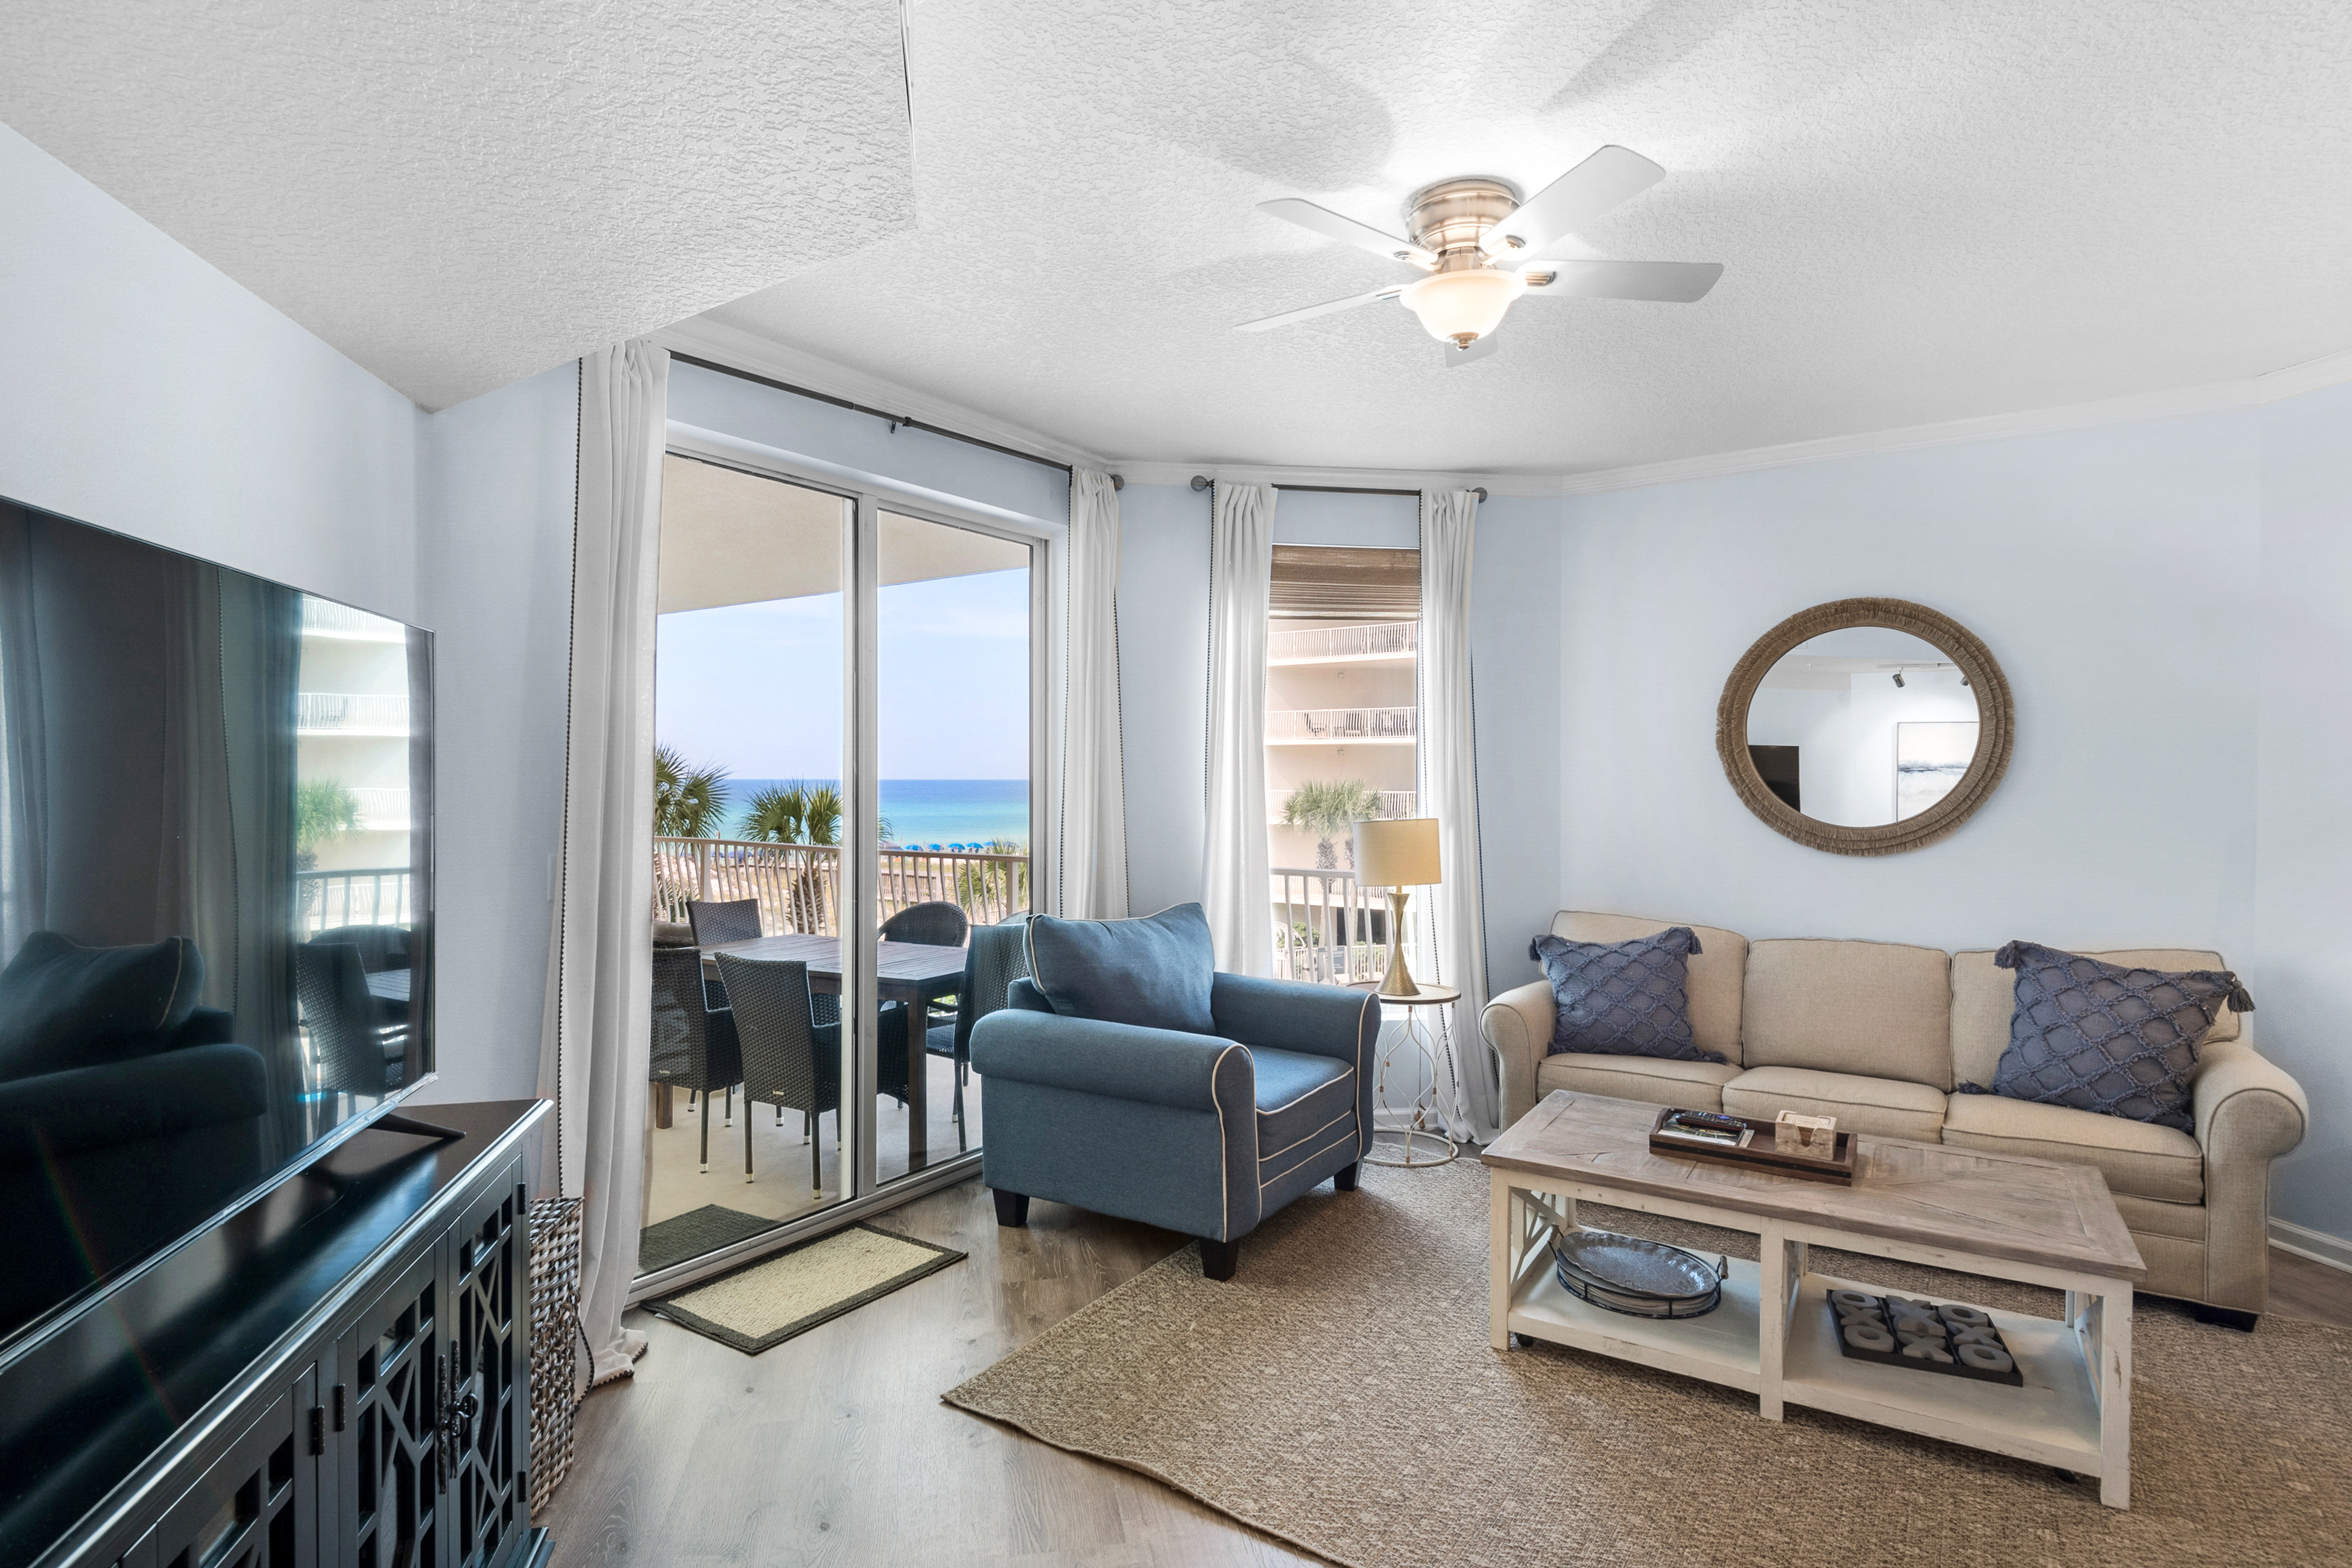 Dunes of Seagrove A206 Condo rental in Dunes of Seagrove in Highway 30-A Florida - #7